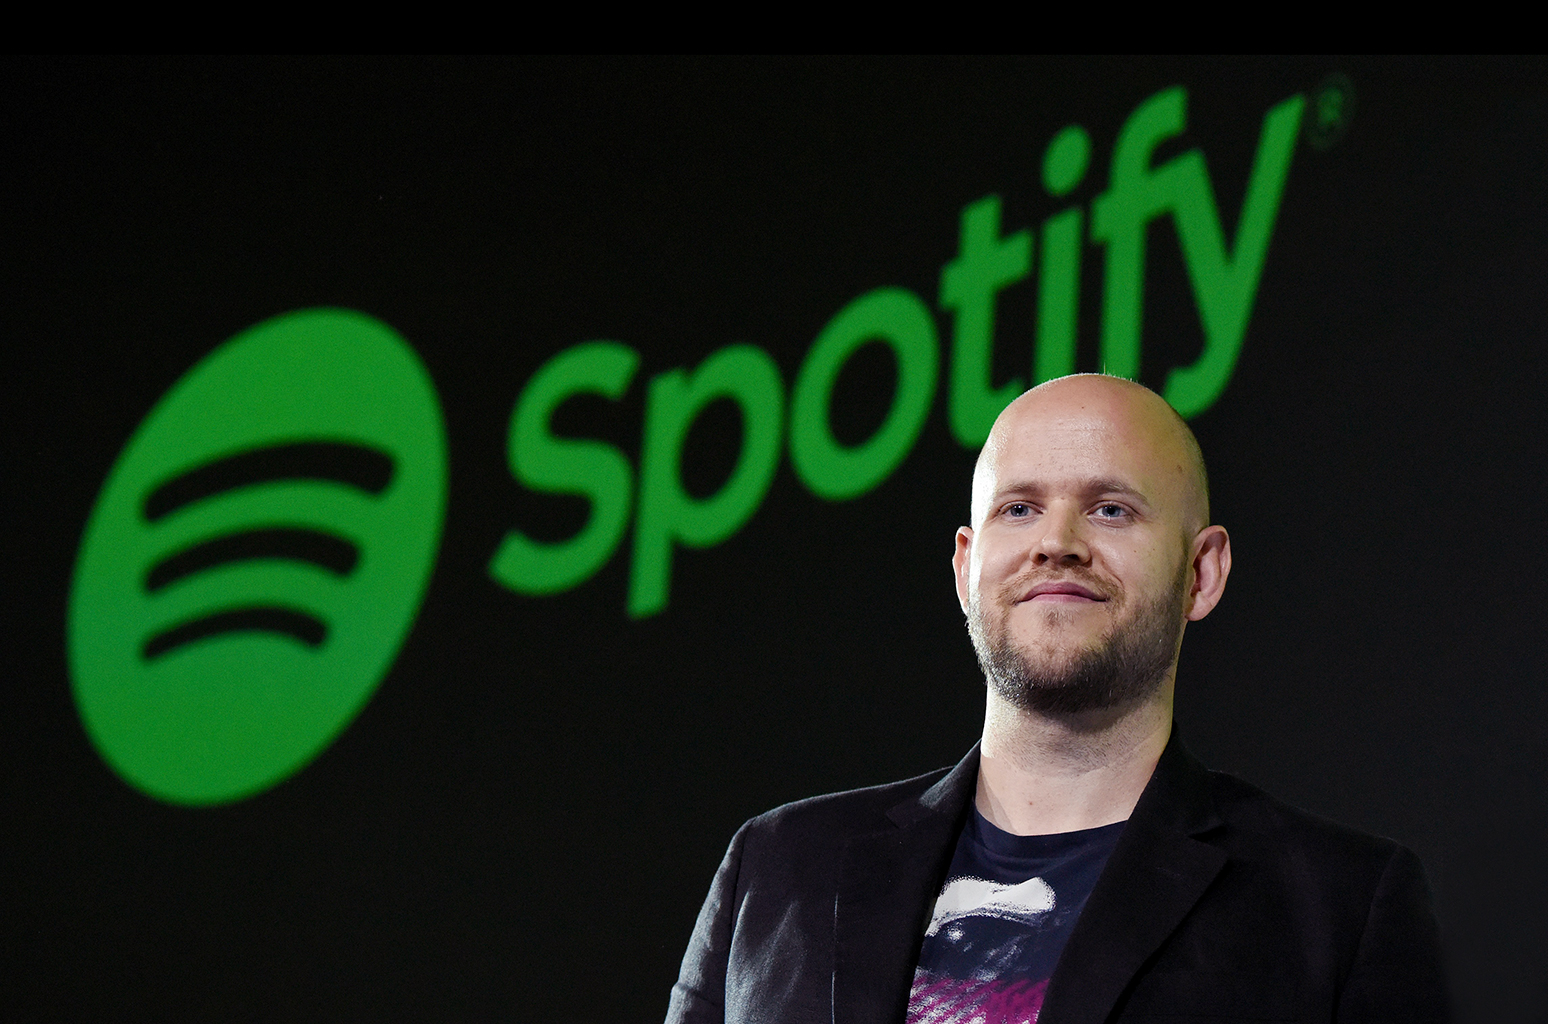 Spotify reach 150 million active users as music streaming booms